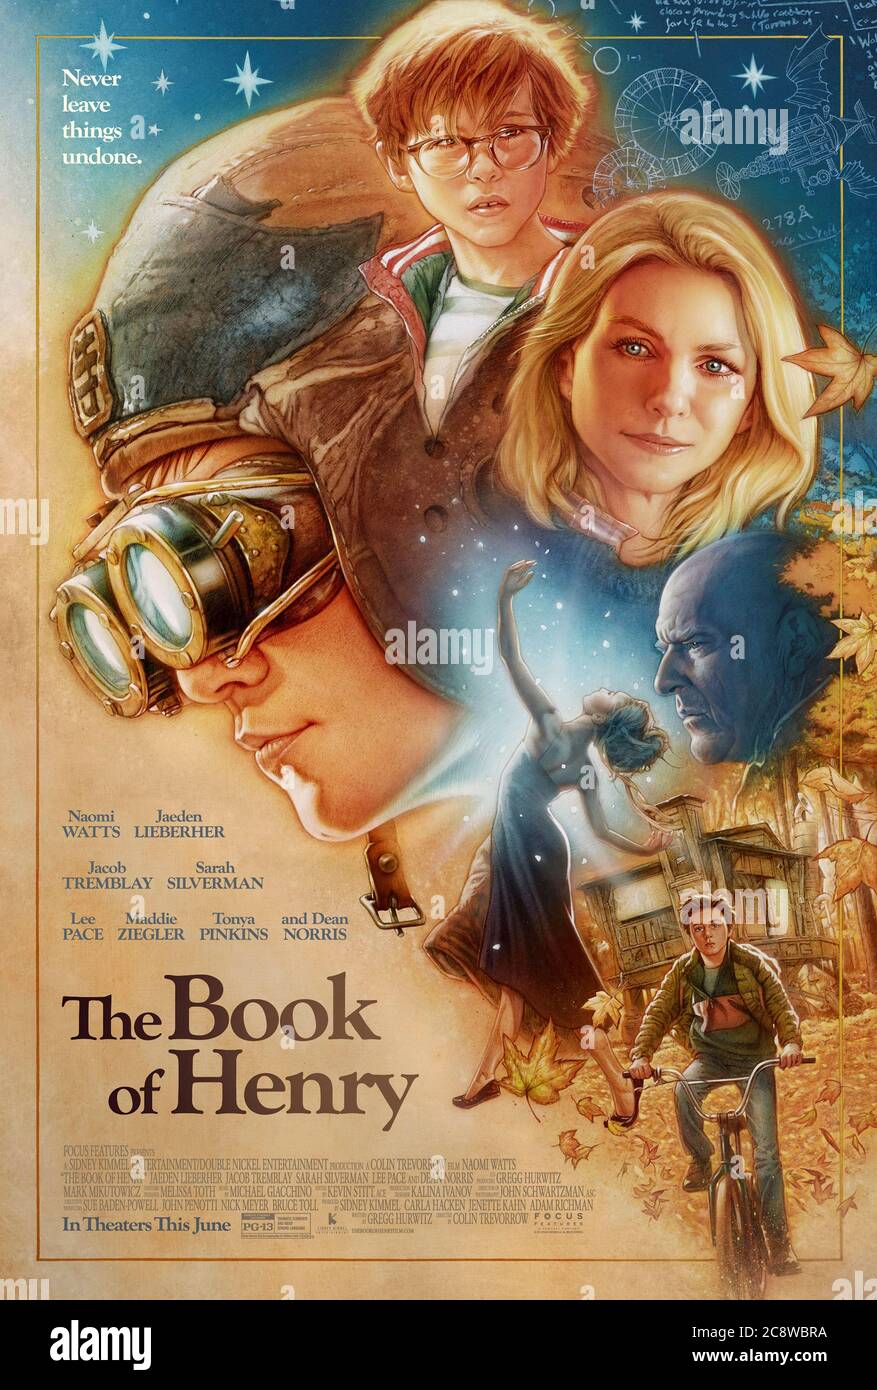 The Book of Henry (2017) directed by Colin Trevorrow and starring Naomi Watts, Jaeden Martell, Jacob Tremblay and Dean Norris. A young genius with terminal cancer sets out to save a girl being abused next door. Stock Photo